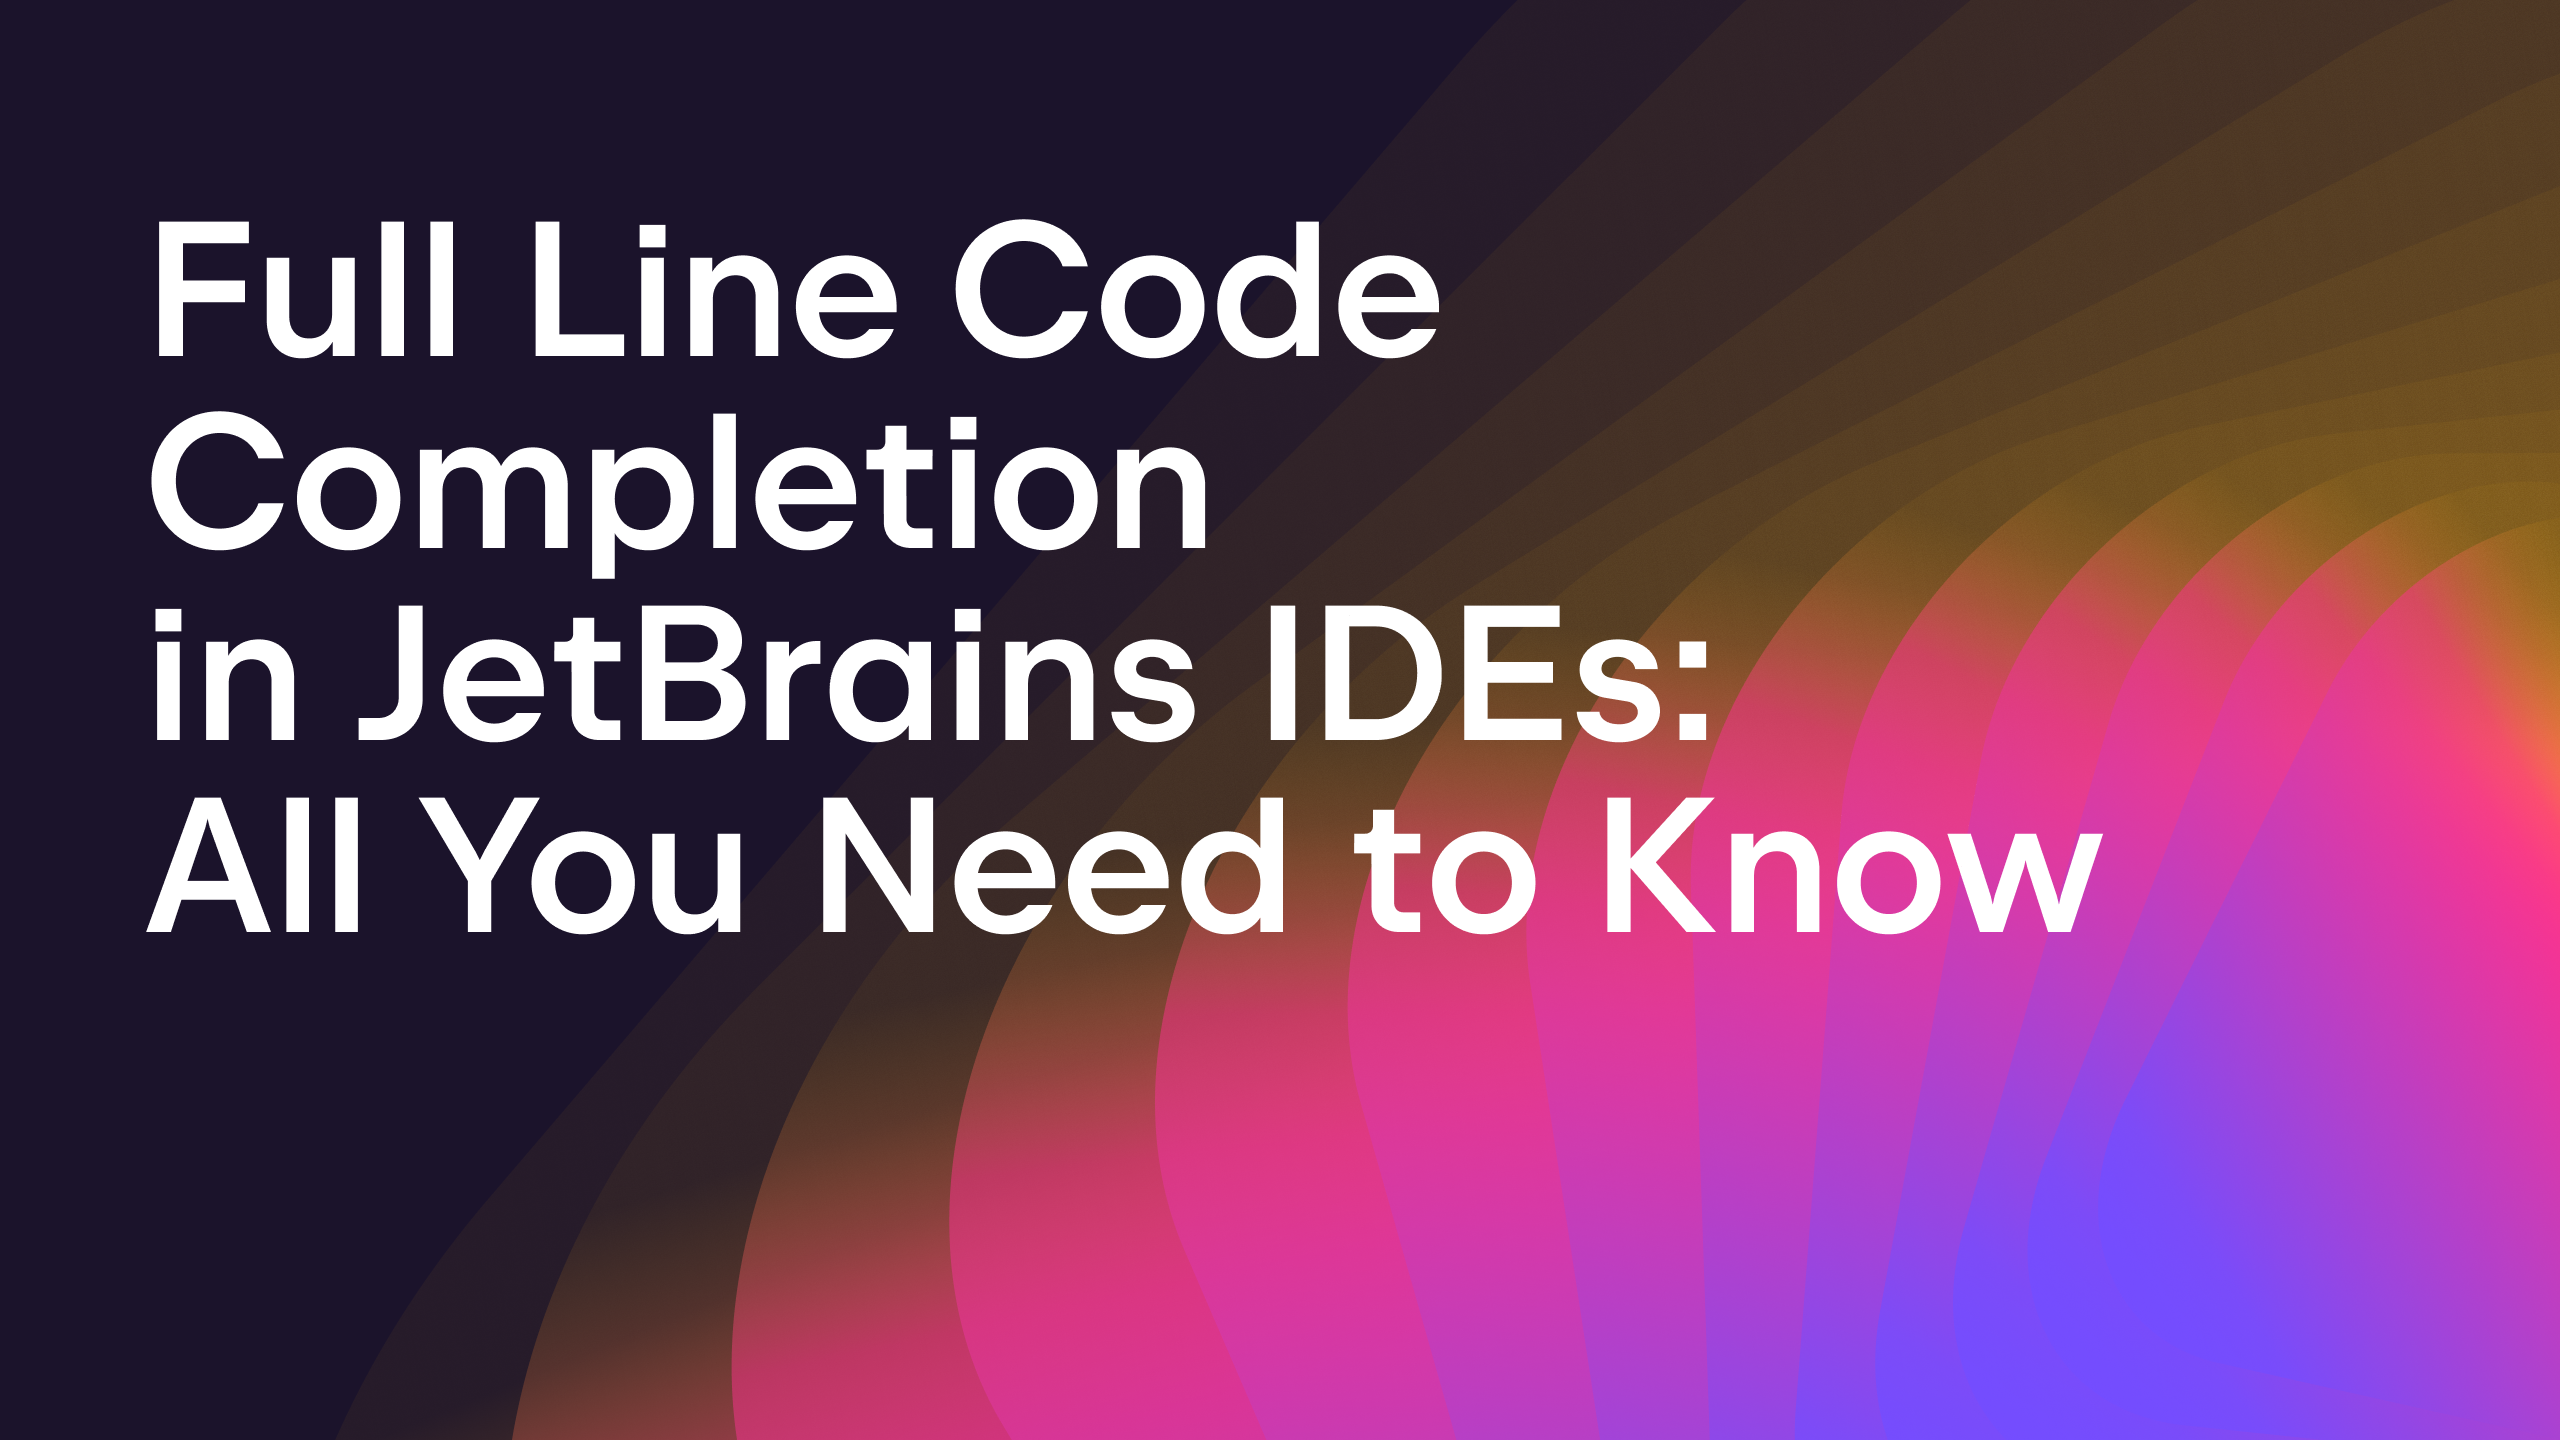 Full Line Code Completion in JetBrains IDEs: All You Need to Know